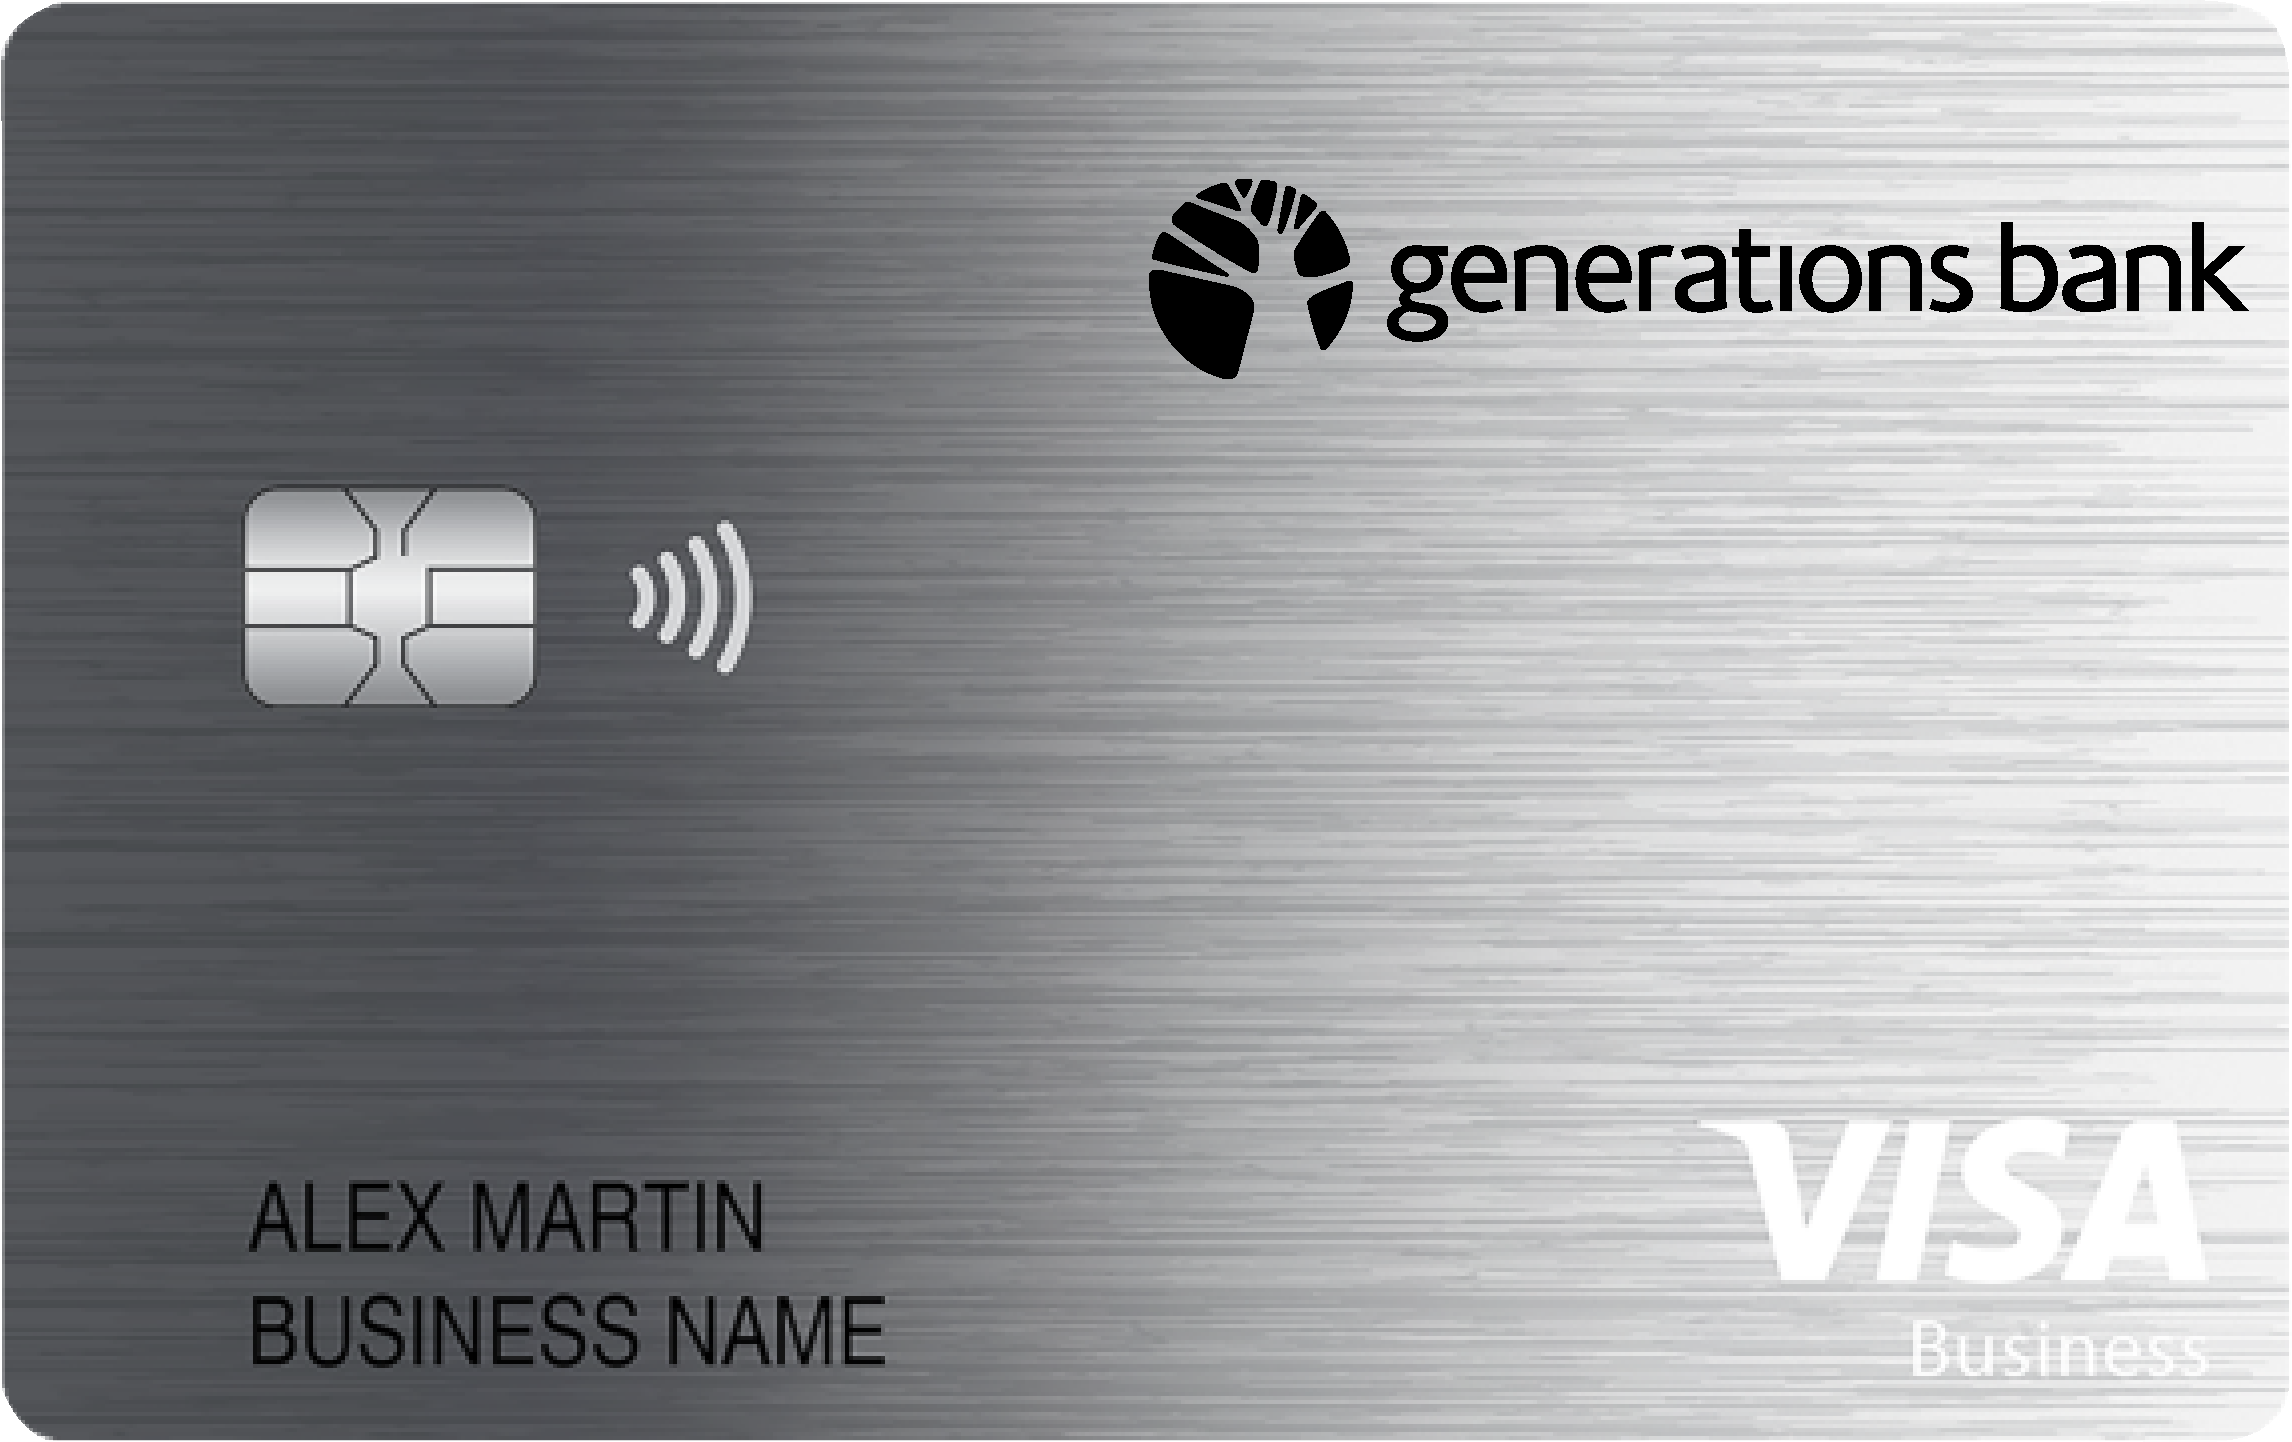 Generations Bank Business Cash Preferred Card